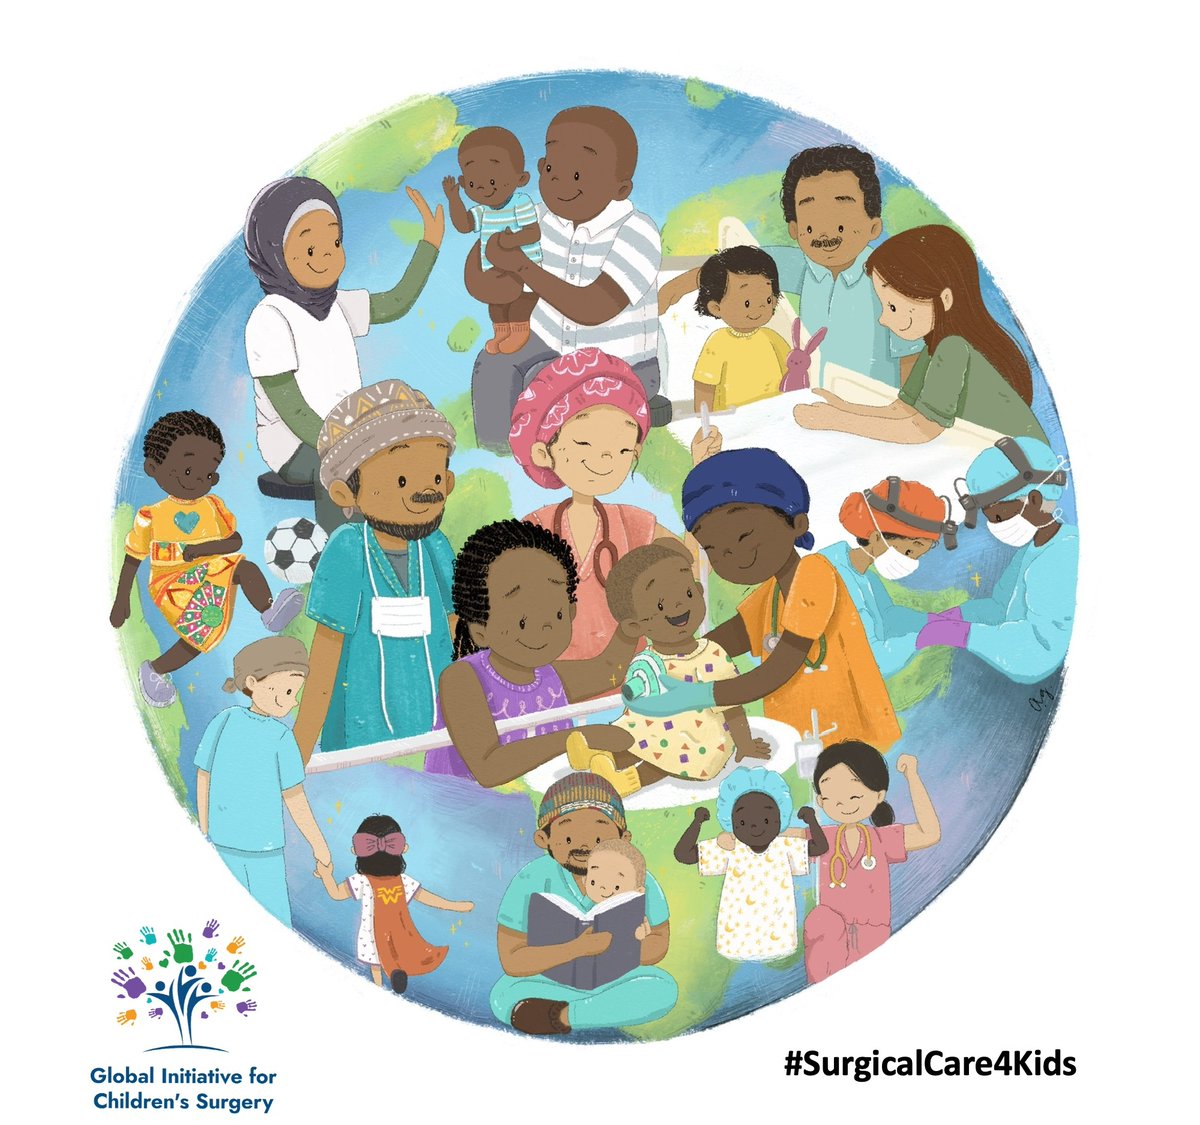 February 26th is Global Children's Surgery Day! Join us in advocating for every child to have access to surgical care. #SurgicalCare4Kids #AnesthesiaCare4Kids #SurgicalNursingCare4Kids #GICSV